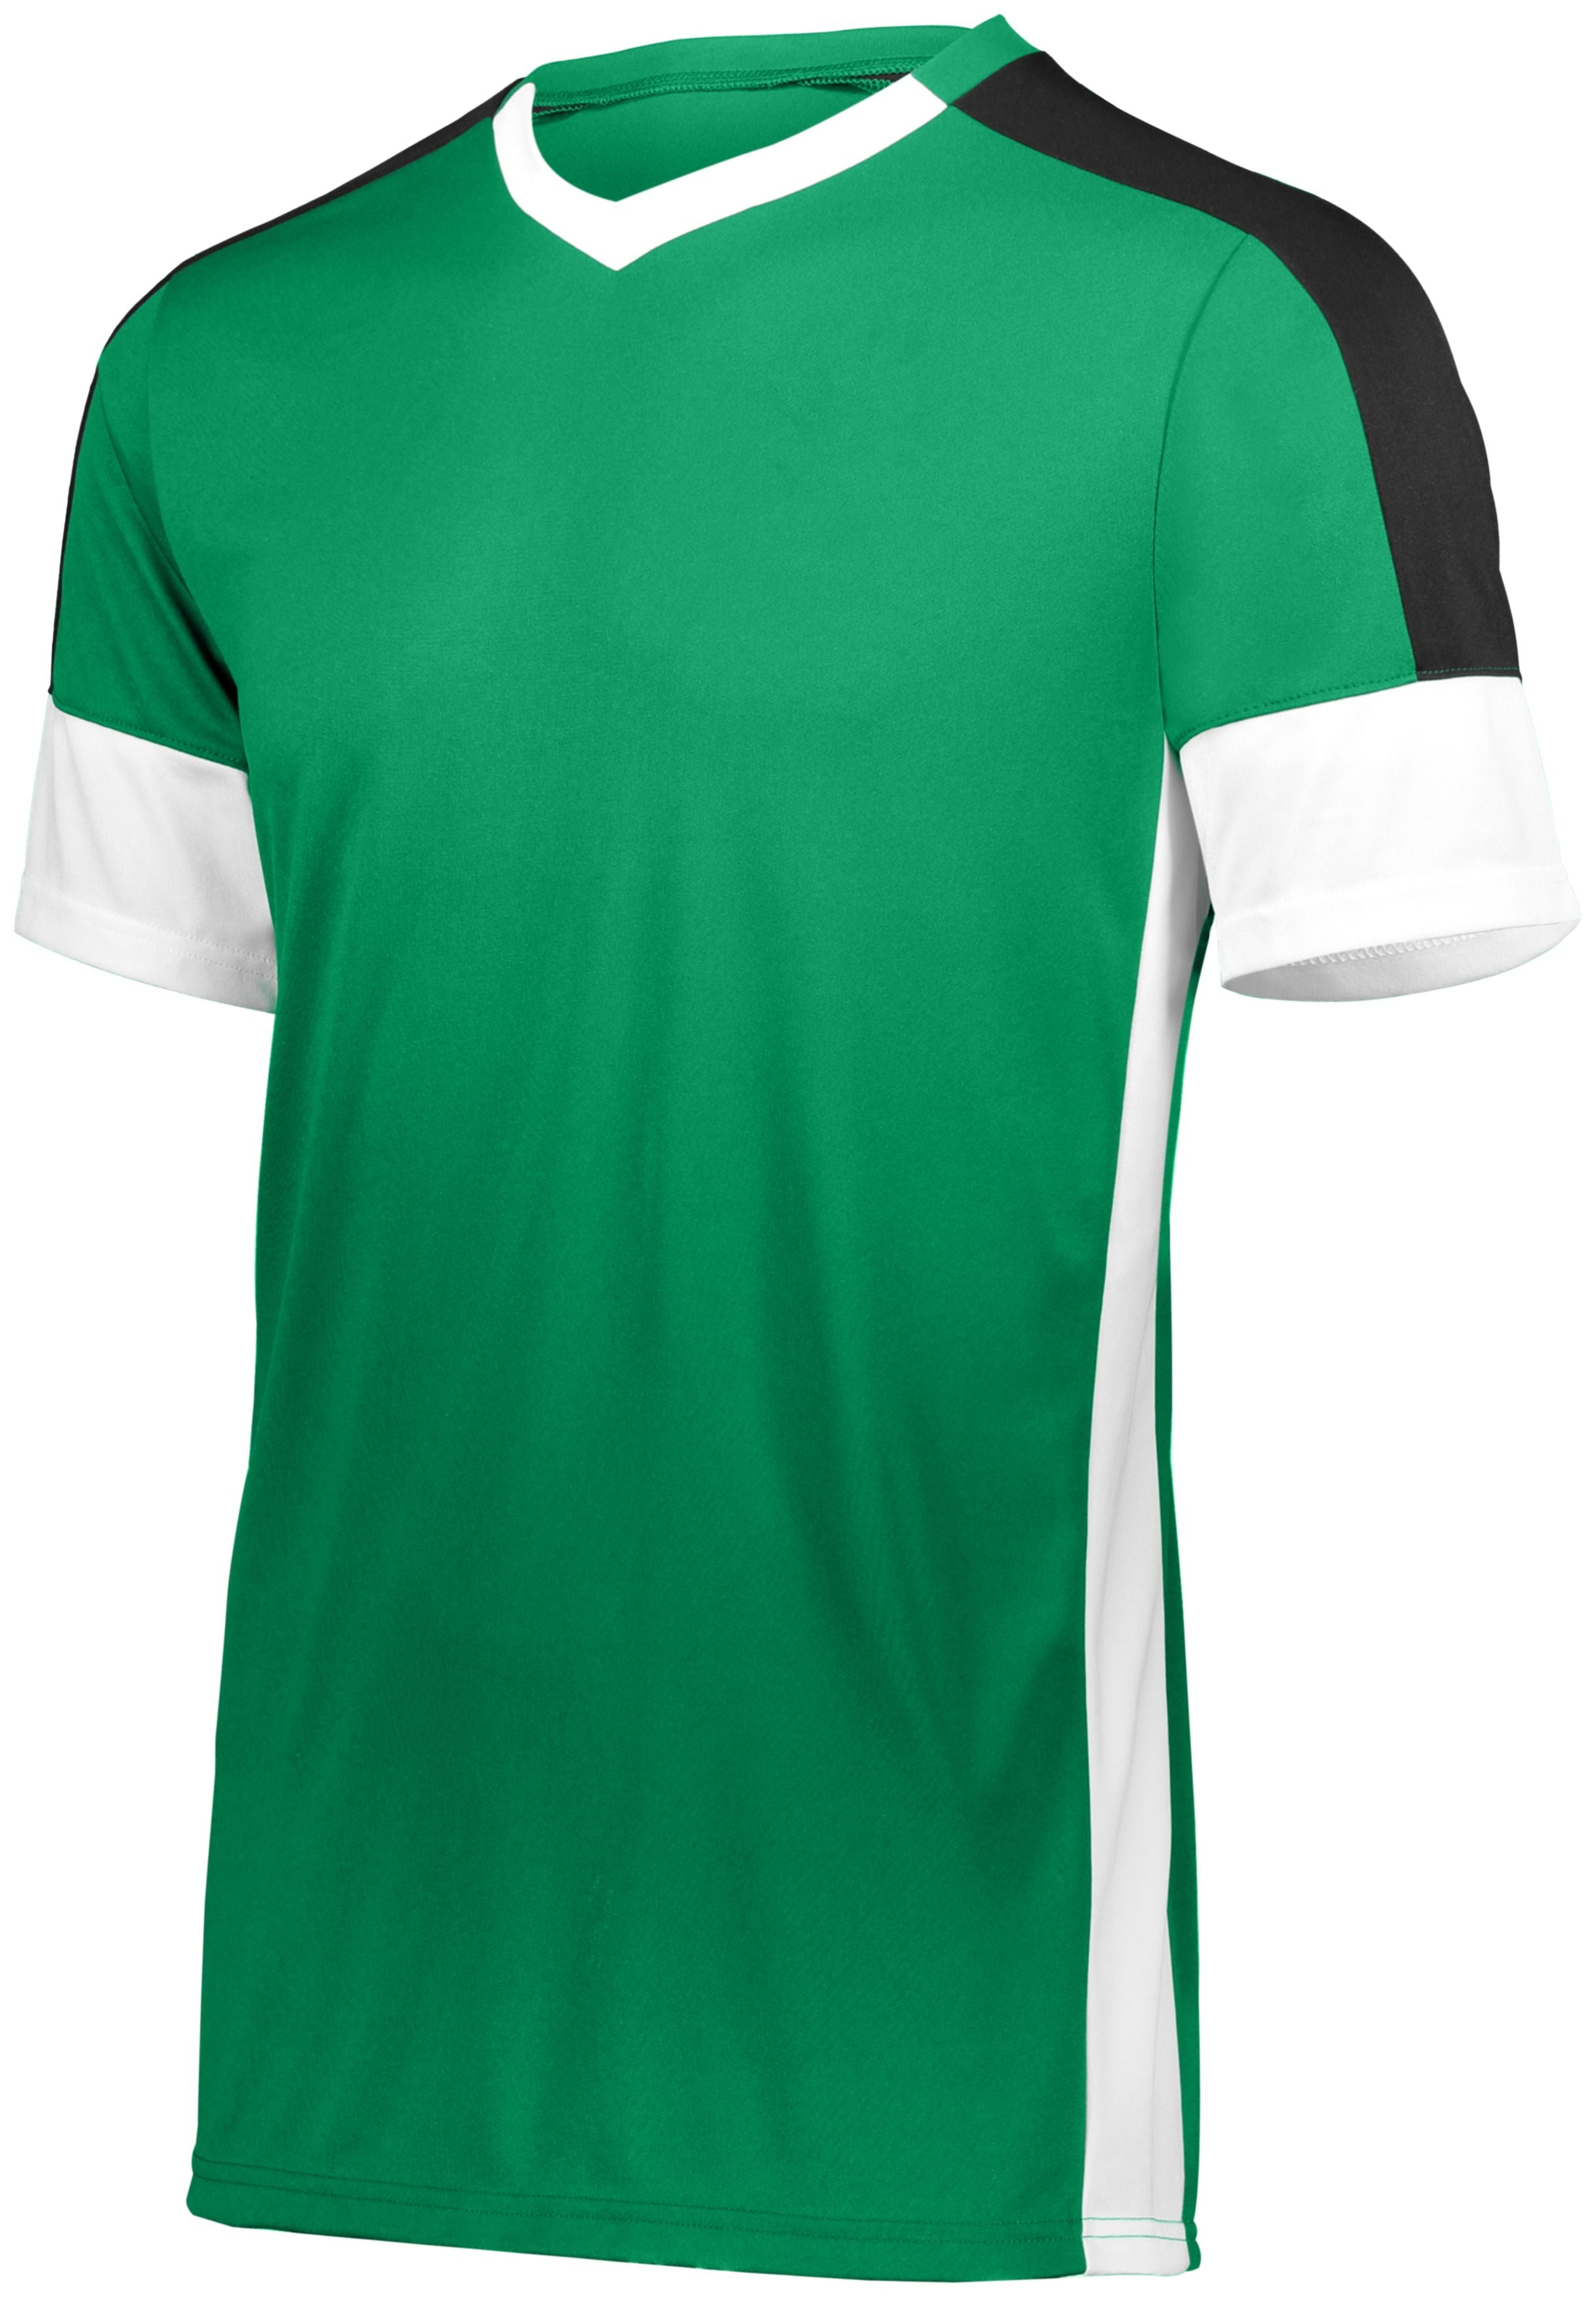 High 5 Youth Wembley Soccer Jersey in Kelly/White/Black  -Part of the Youth, Youth-Jersey, High5-Products, Soccer, Shirts, All-Sports-1 product lines at KanaleyCreations.com